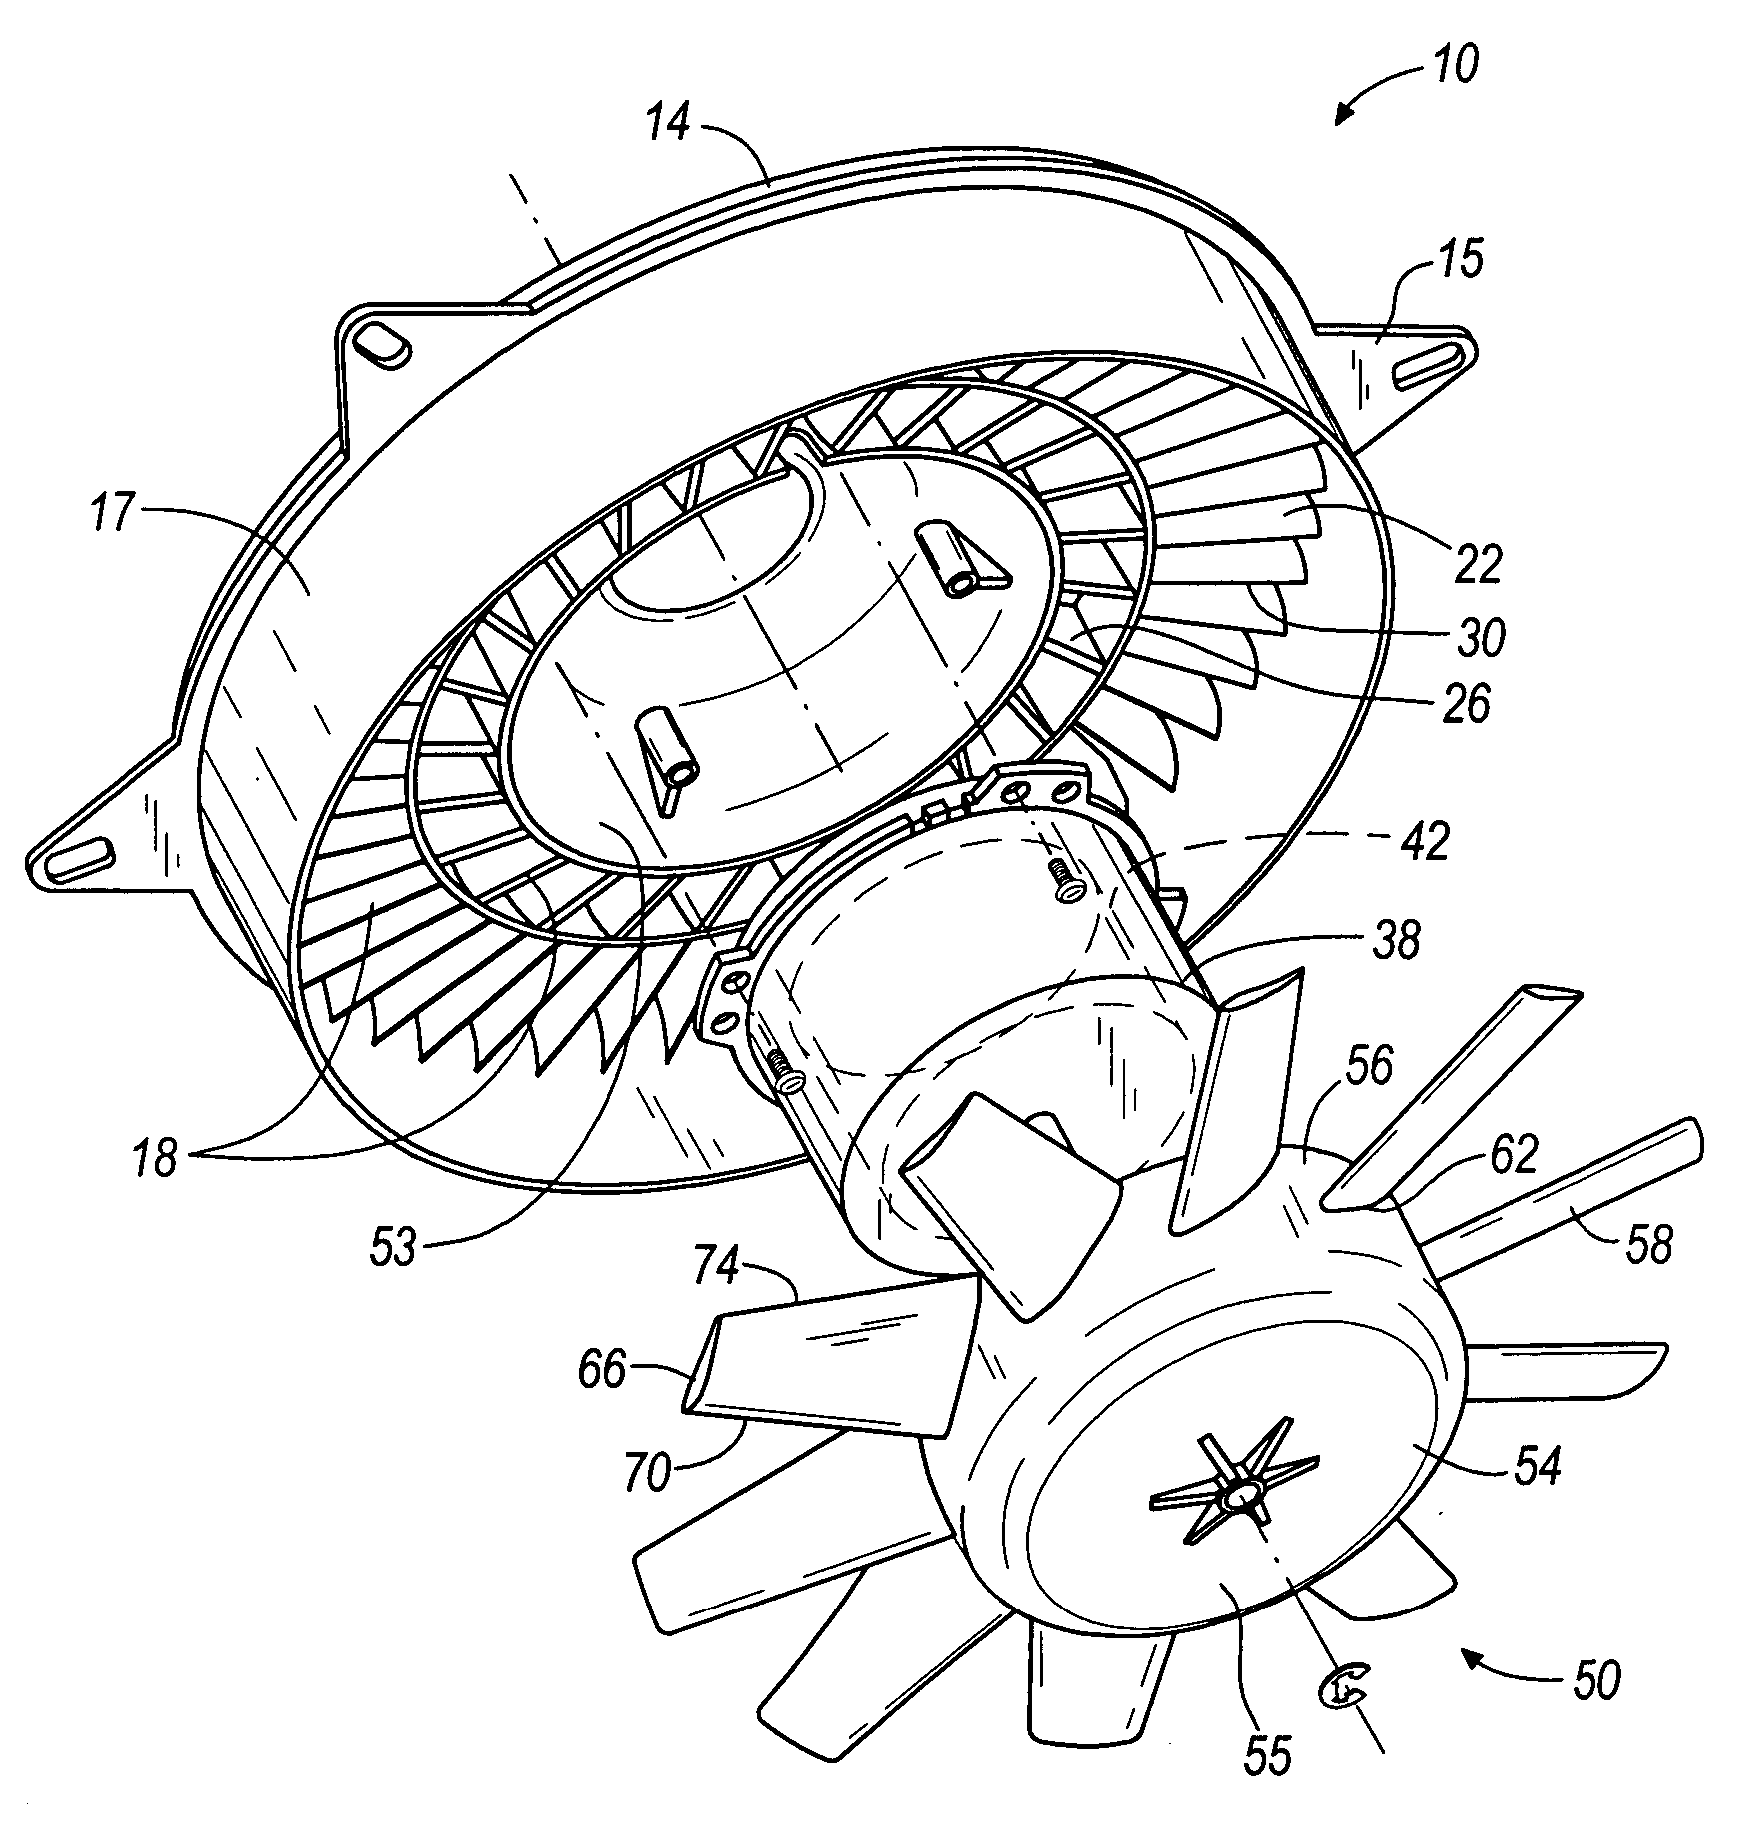 Fan assembly and method